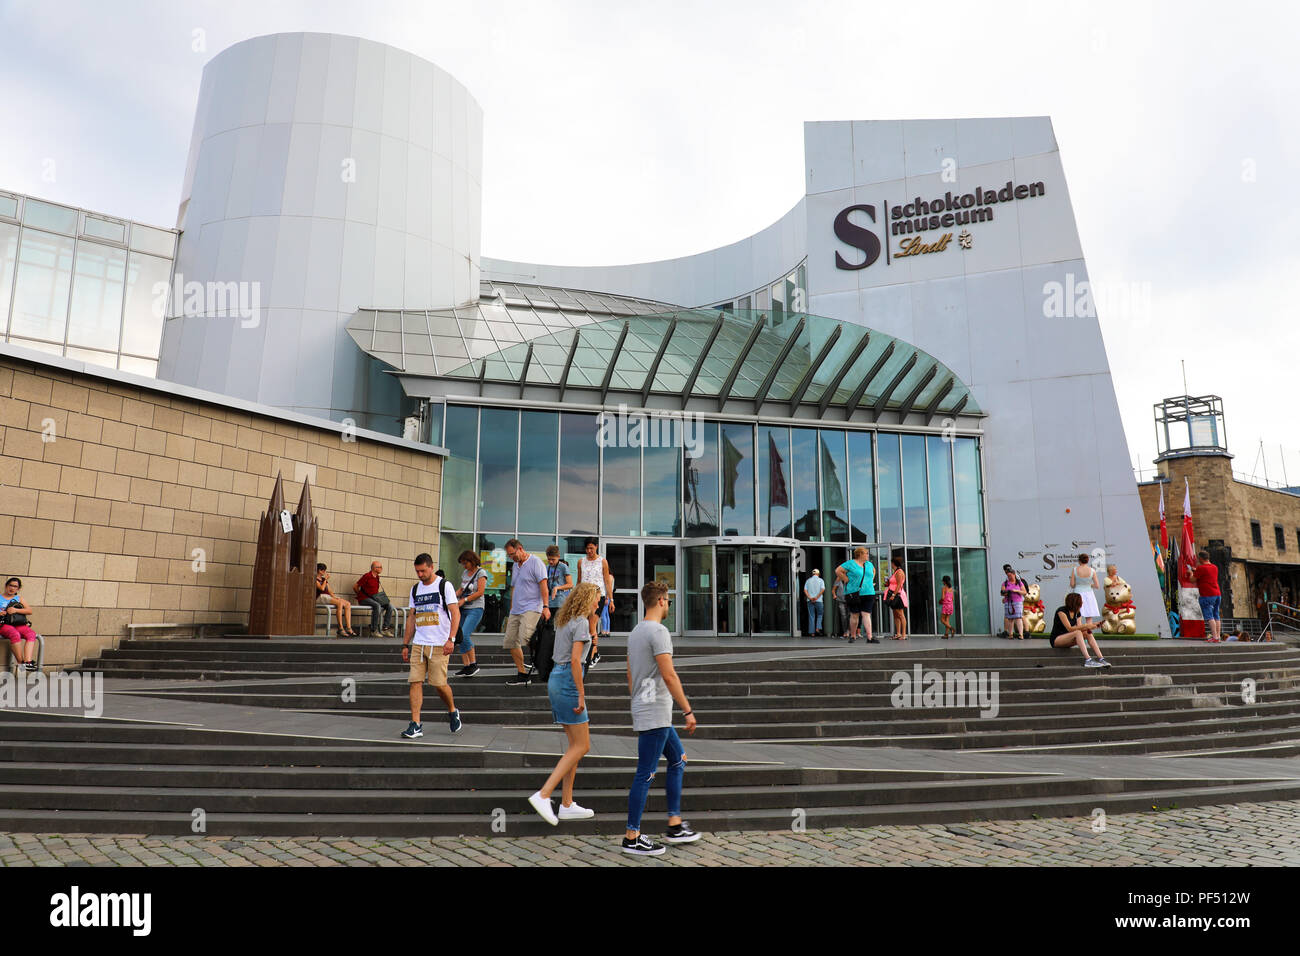 COLOGNE, GERMANY - MAY 31, 2018: Schokoladen museum, famous chocolate  museum by Lindt in Cologne, Germany Stock Photo - Alamy